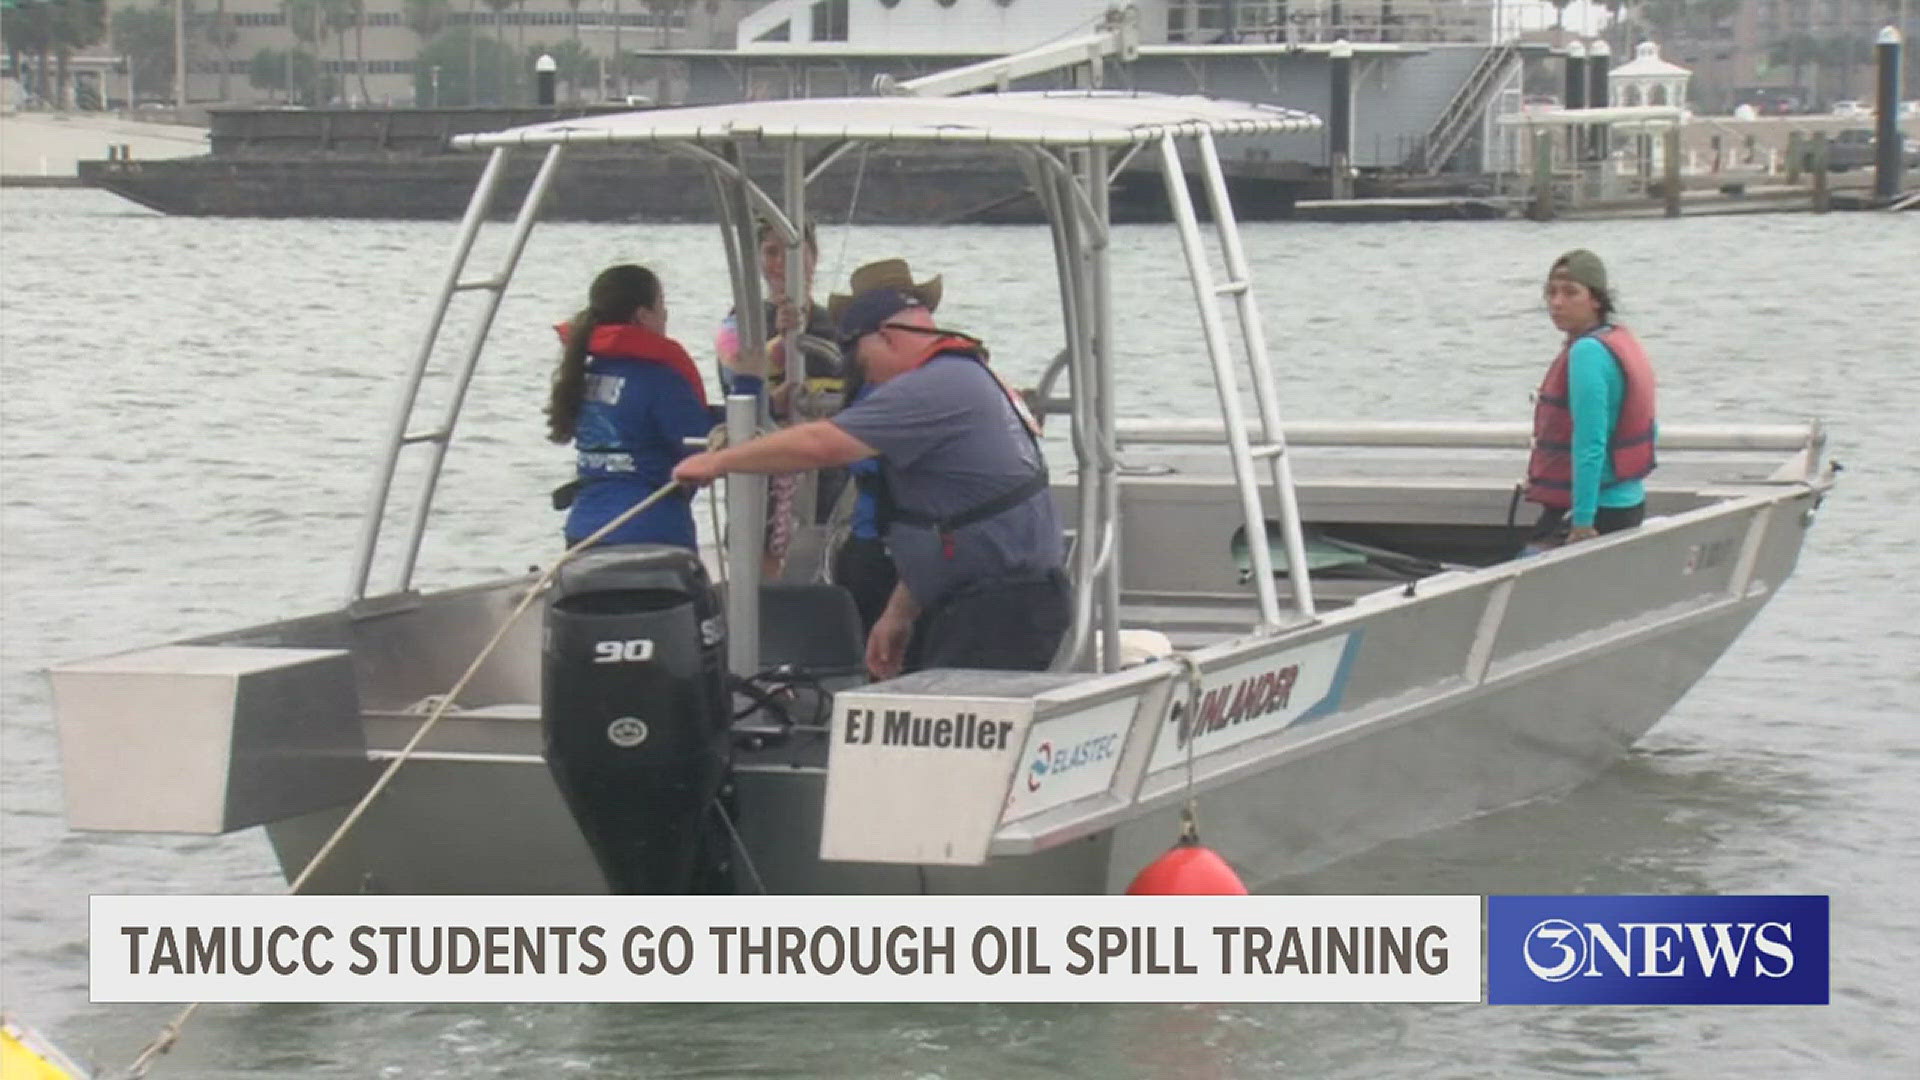 The Oil Spill Response Training Program has been happening at the school for 50 years now.